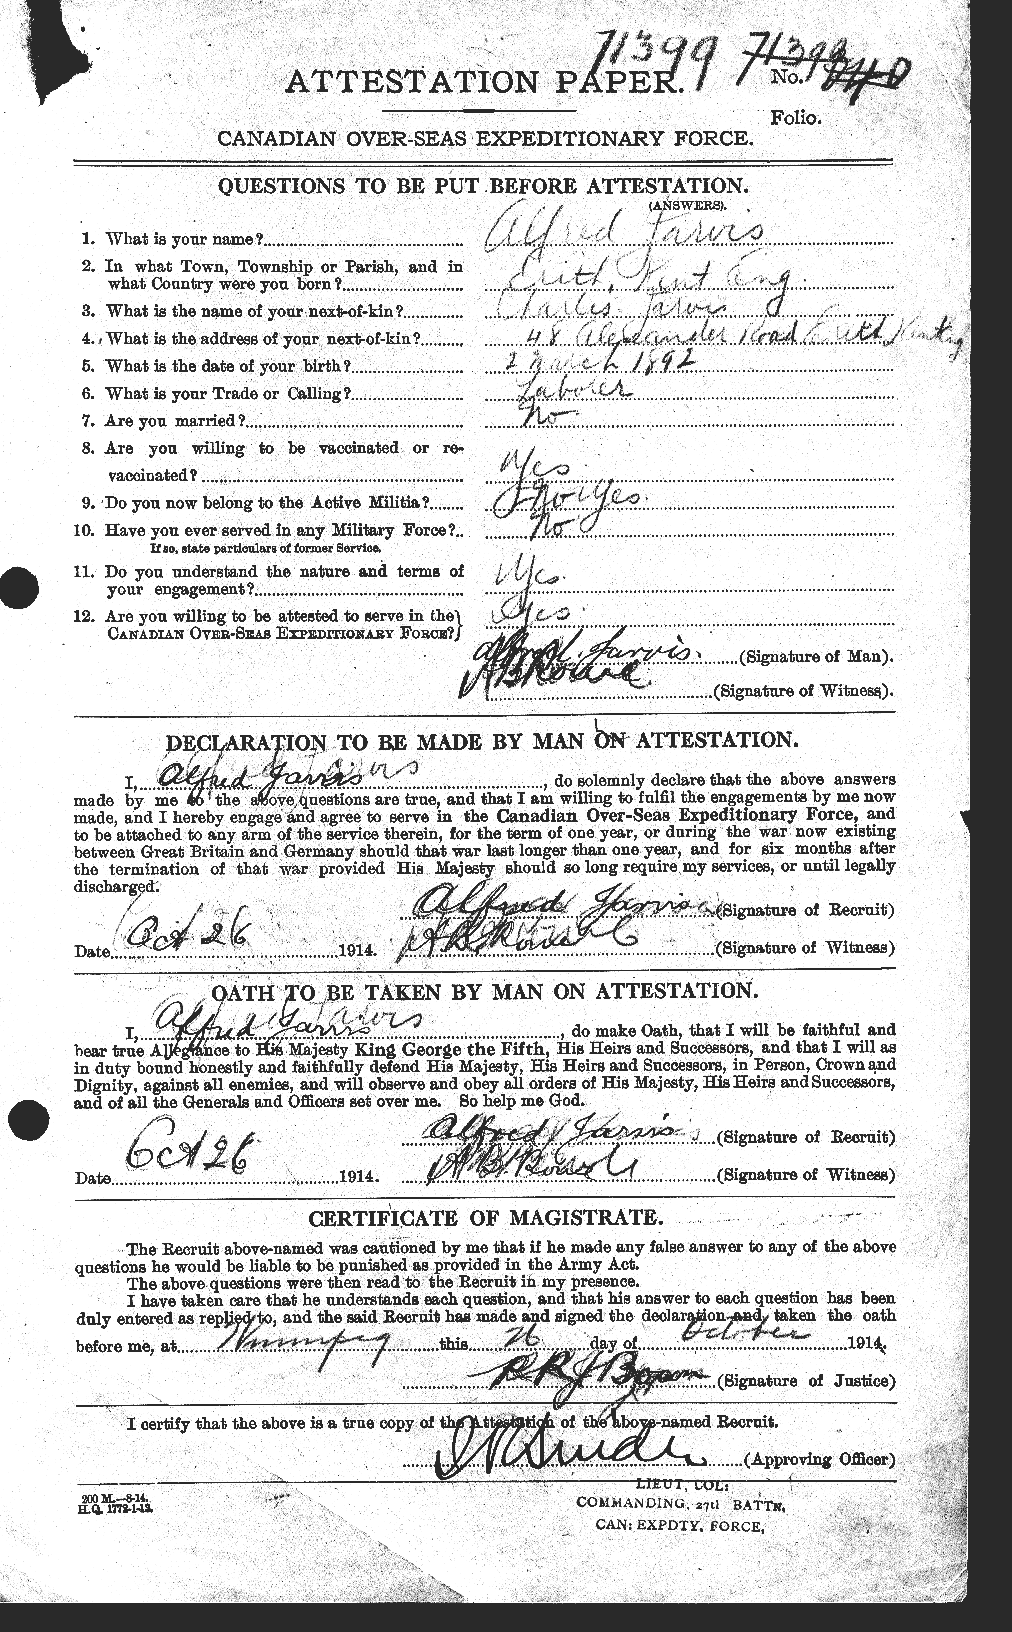 Personnel Records of the First World War - CEF 414633a